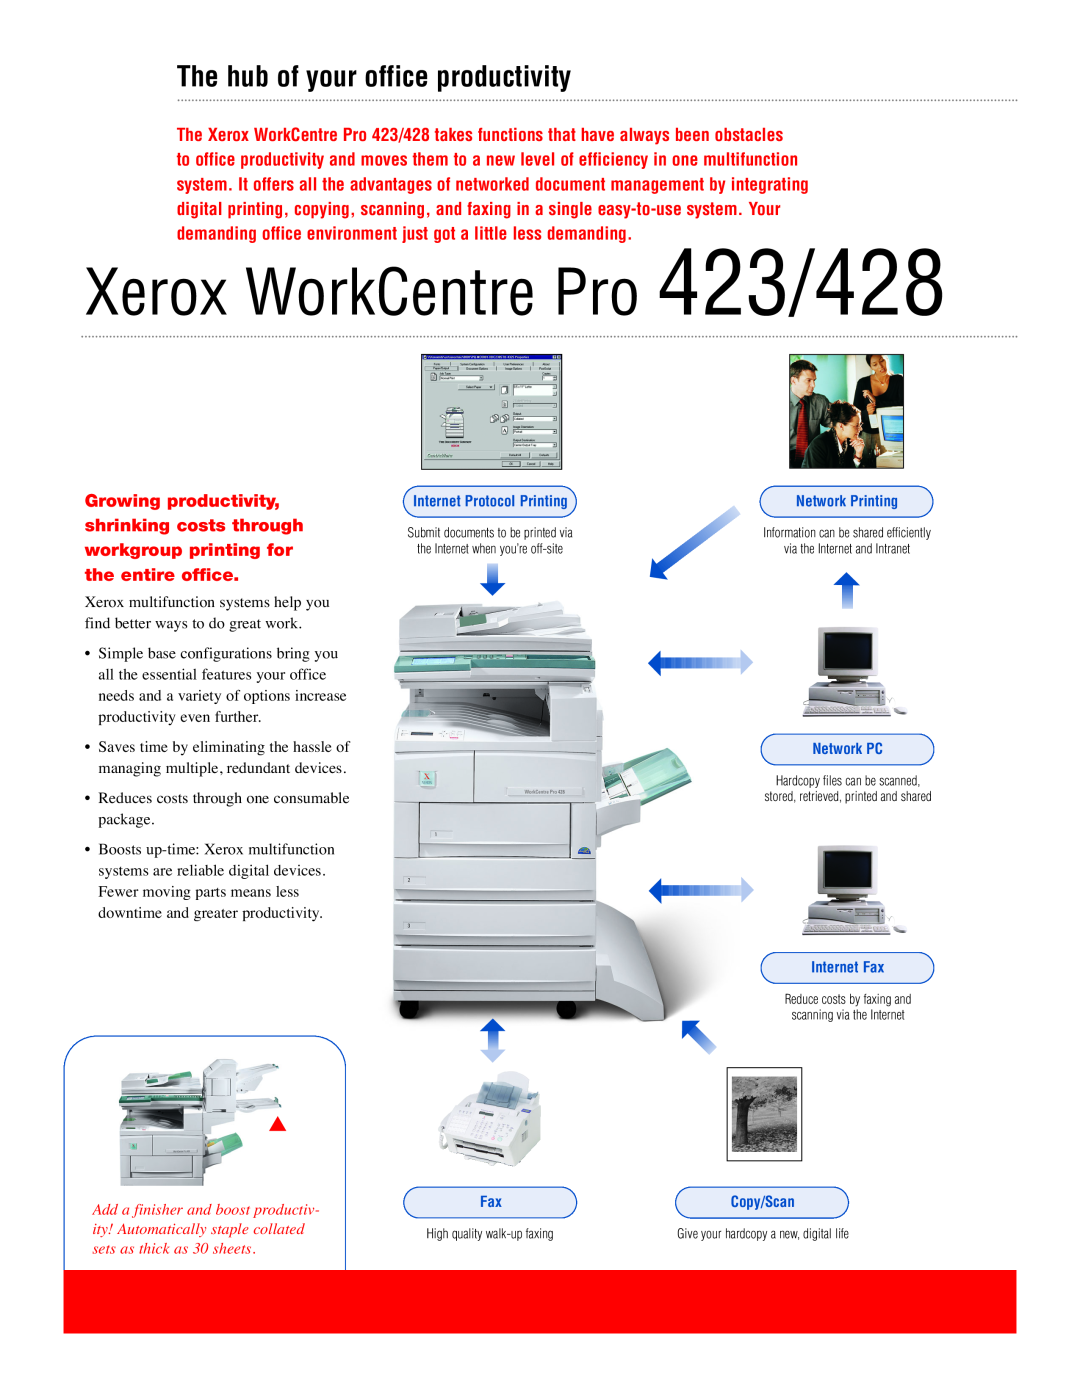 Xerox manual The hub of your office productivity, Xerox WorkCentre Pro 423/428 